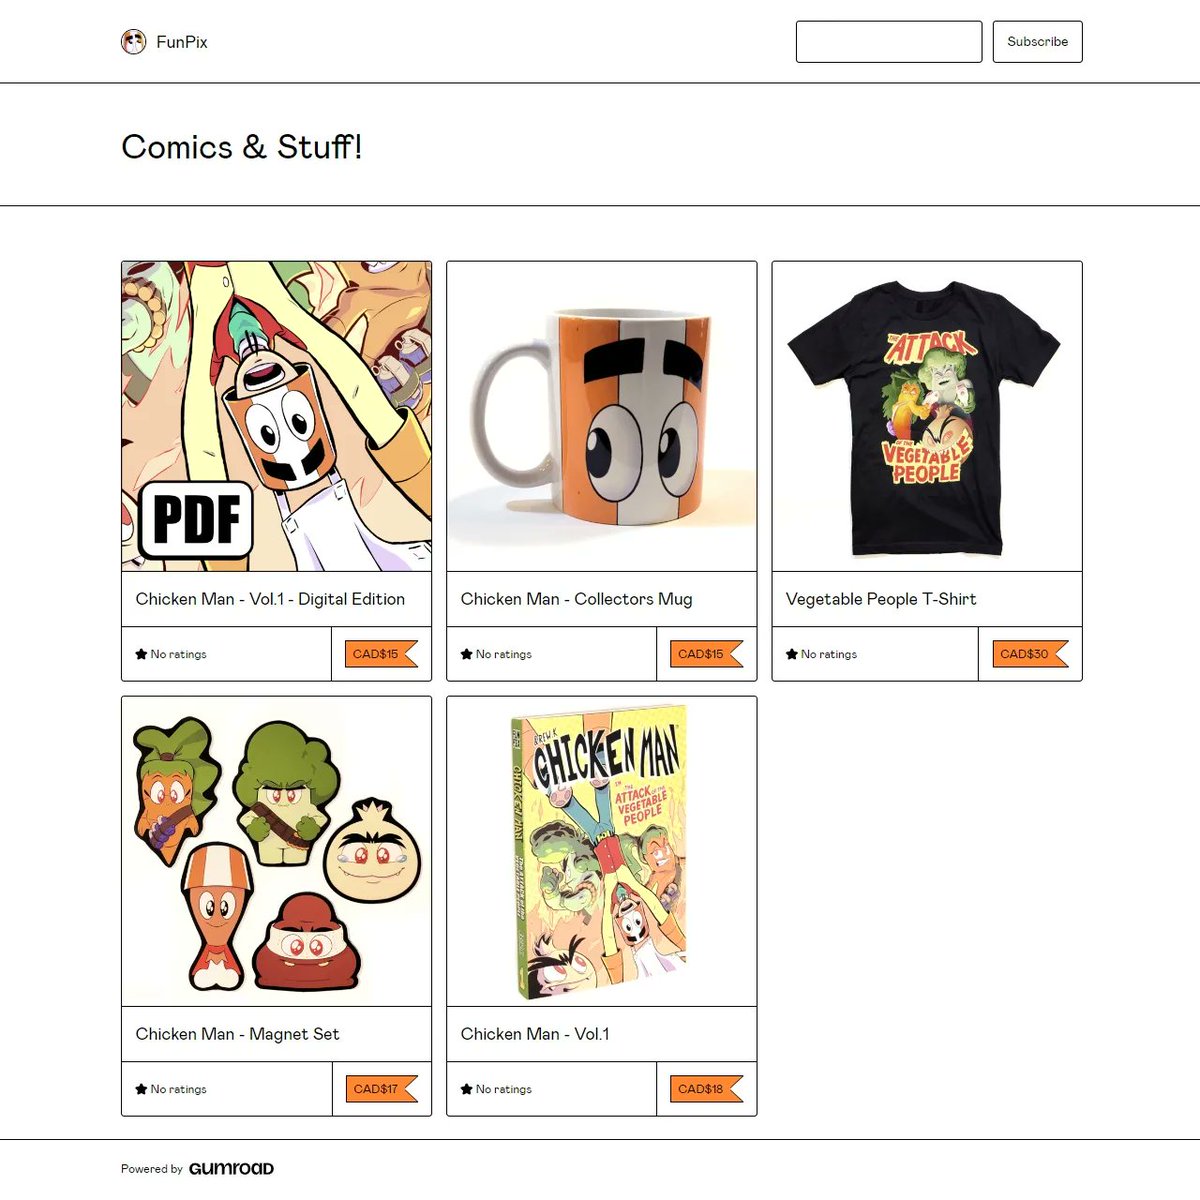 The FunPix Store is now live on Gumroad! funpix.gumroad.com

With TCAF just around the corner, I felt it was about time to make Chicken Man available online!

#chickenman #funpix #onlinestore #comic #merch #indycomics #graphicnovel #gumroad #mugs #tshirts